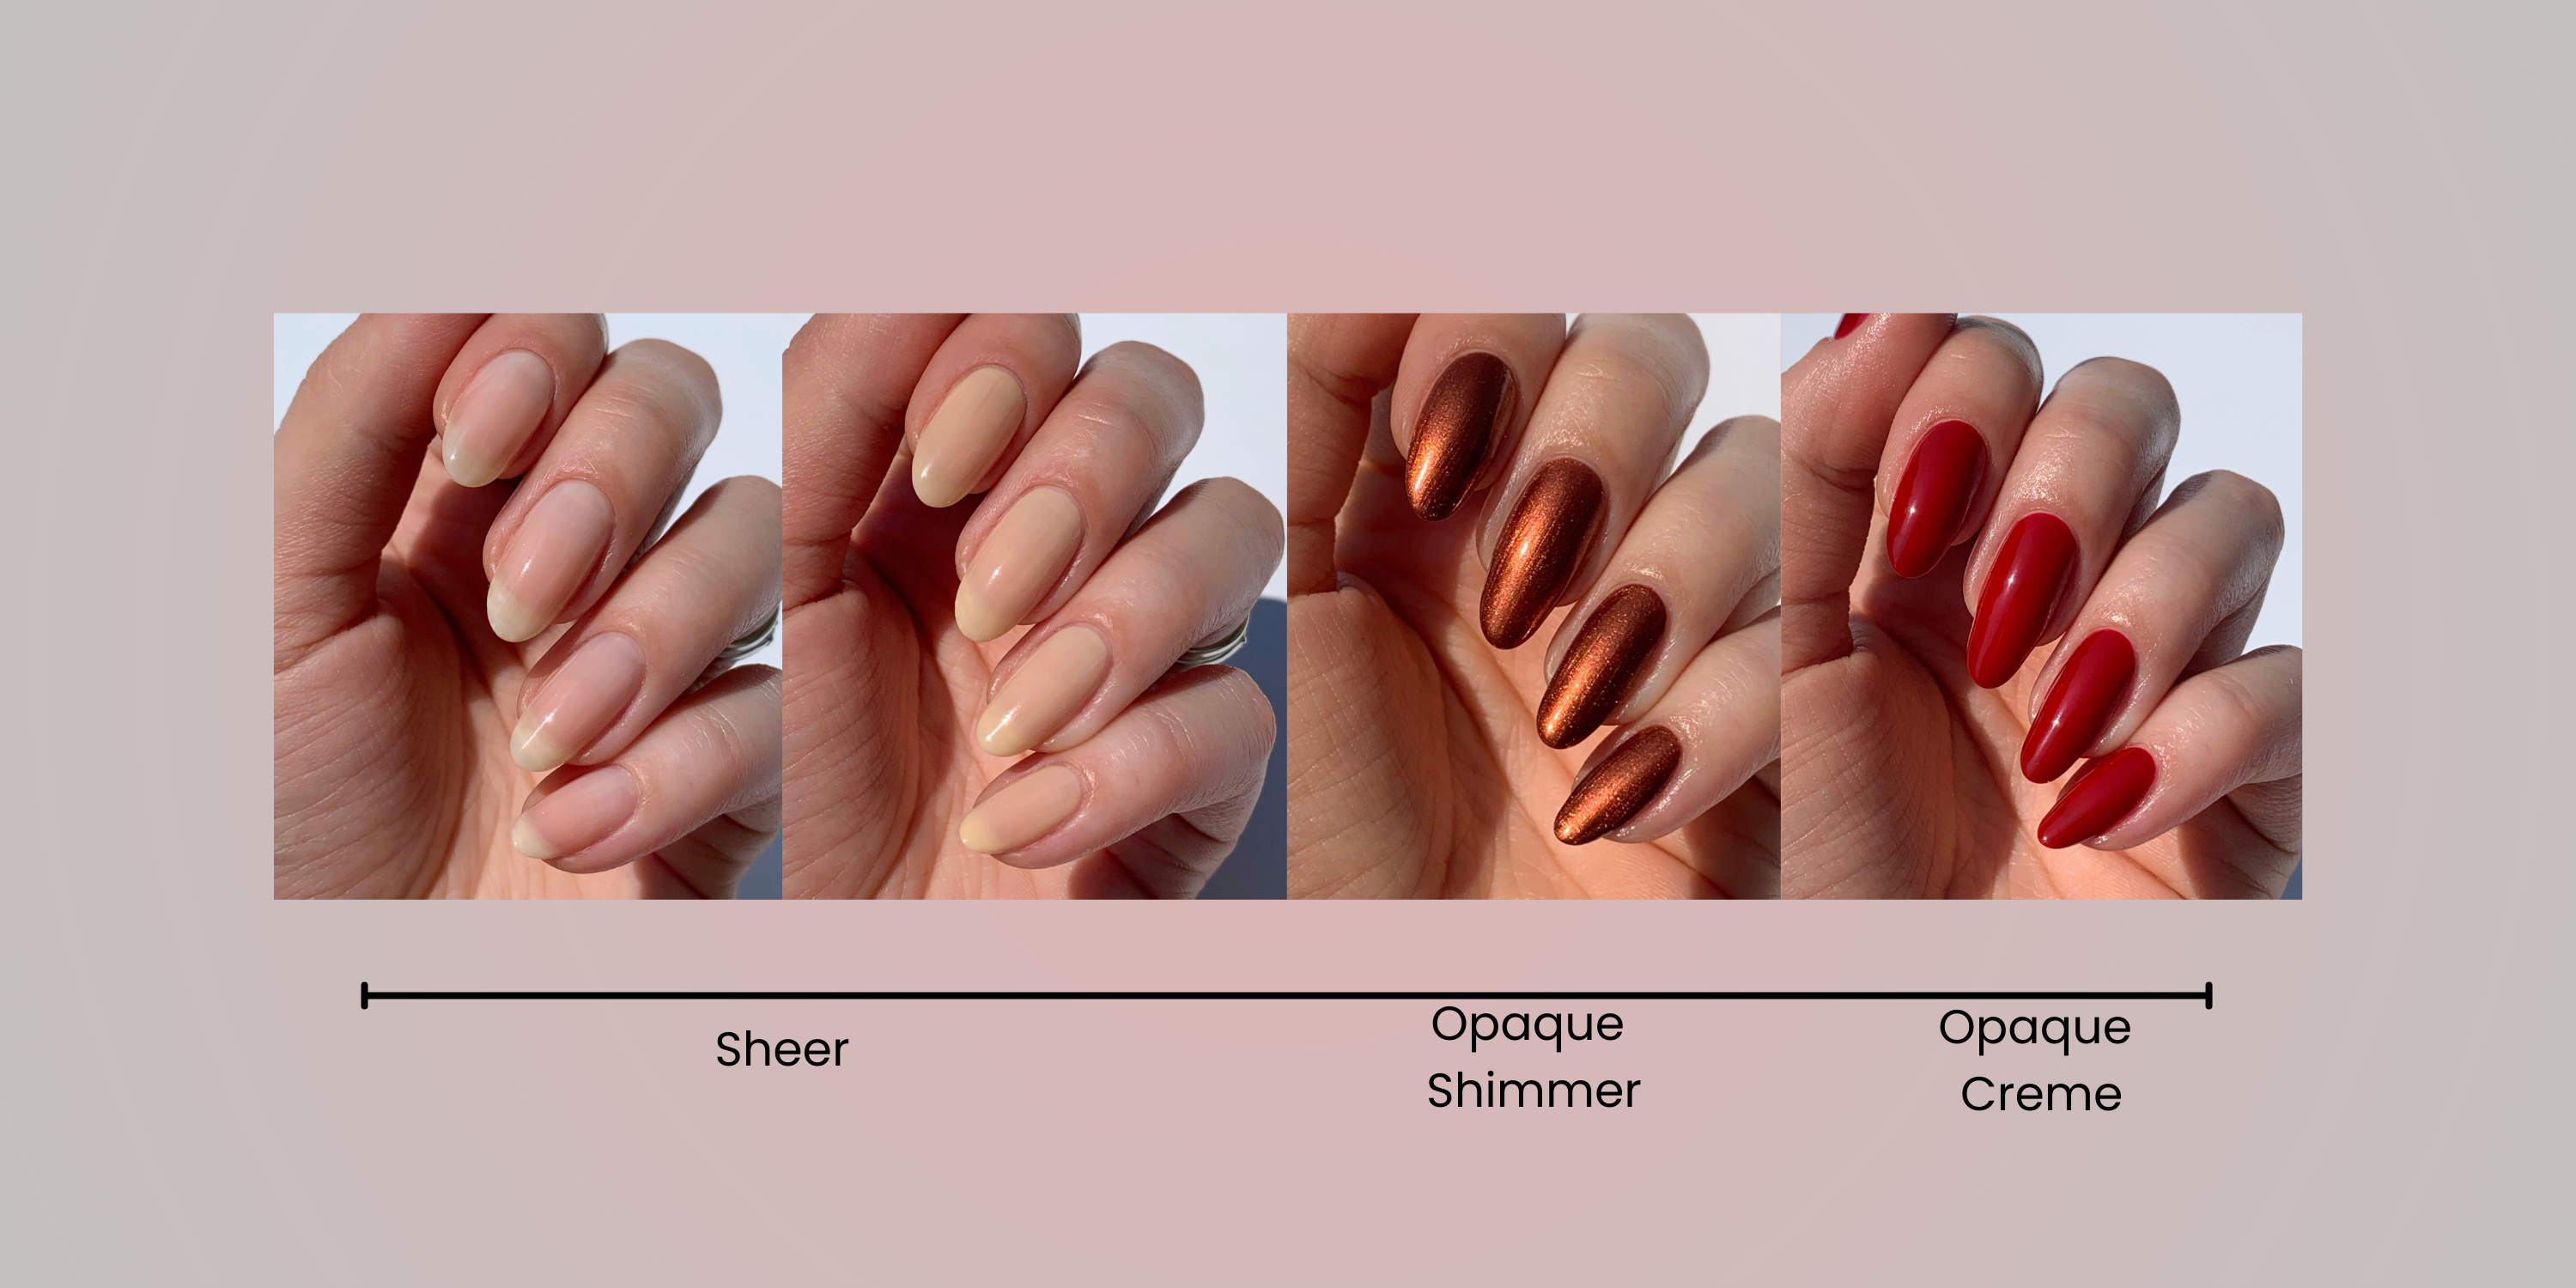 Sheer VS Opaque Nail Polish: What's the difference? – LONDONTOWN